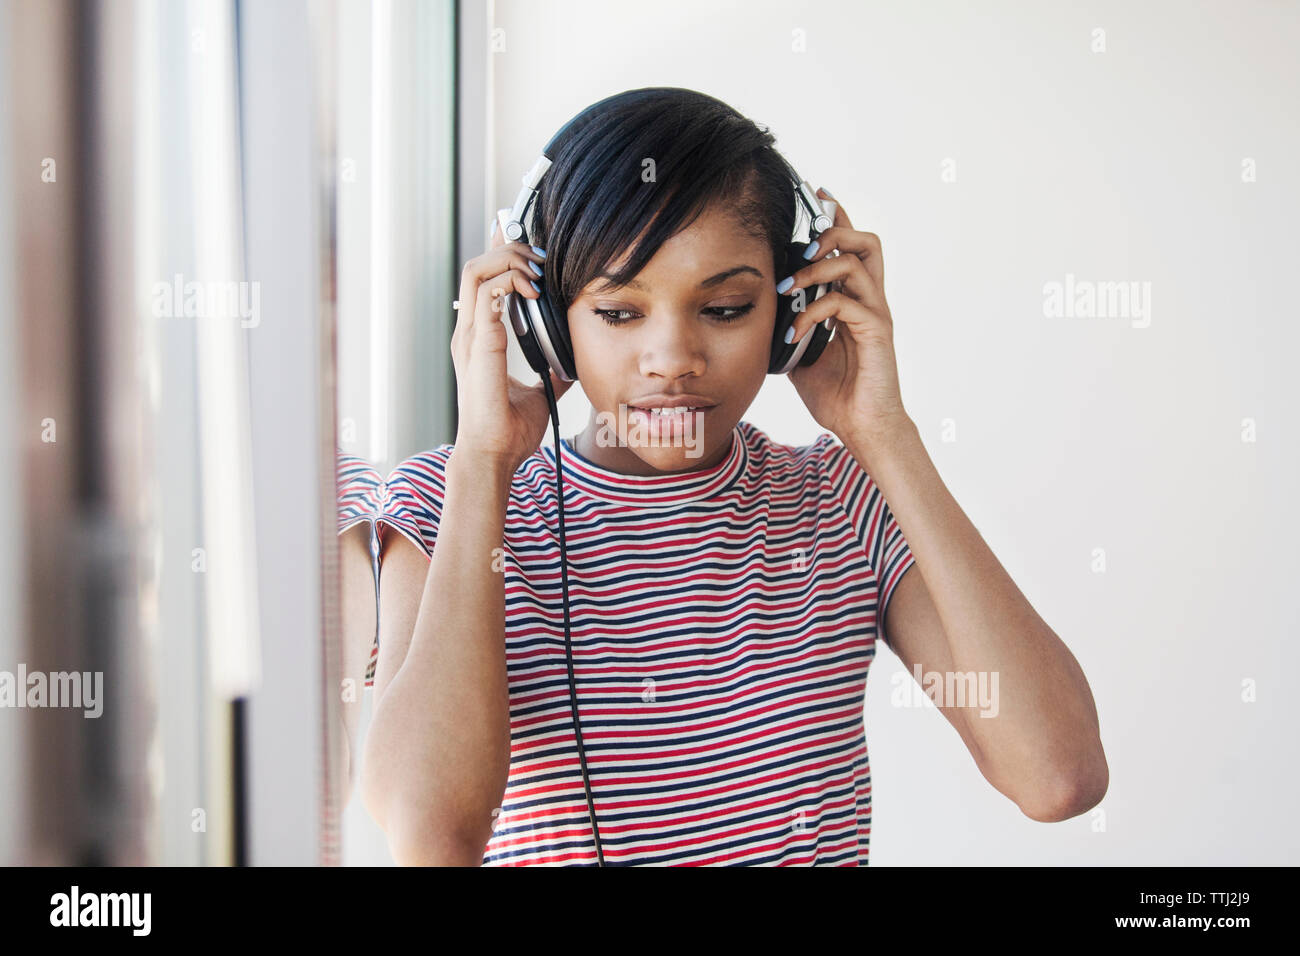 Woman looking away while wearing headphone at home Stock Photo